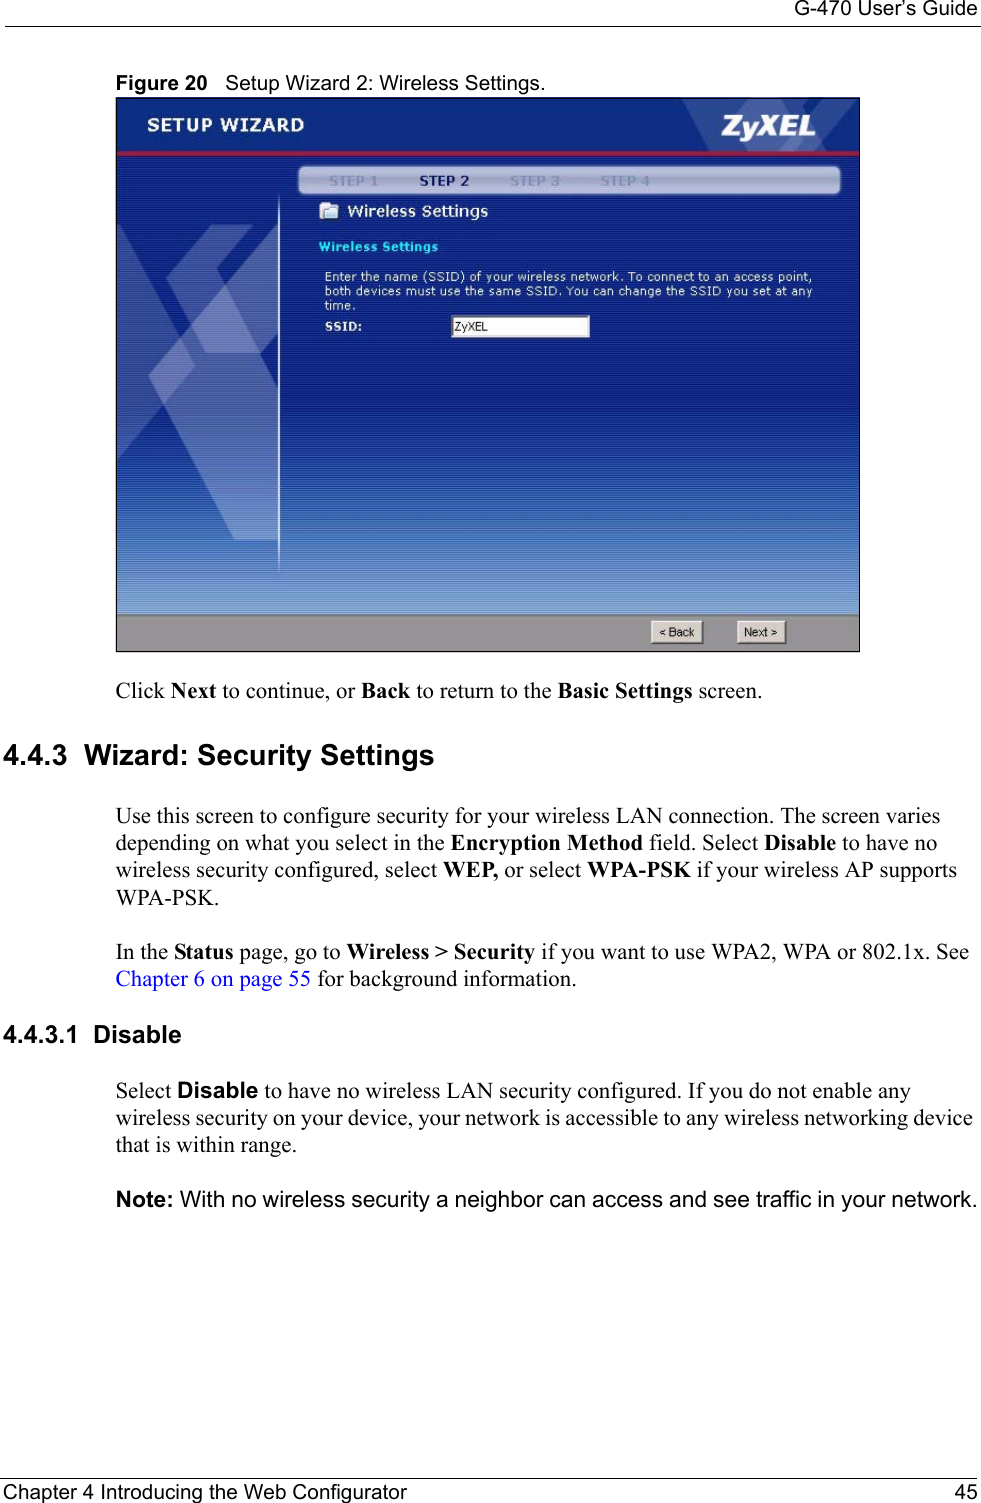 G-470 User’s GuideChapter 4 Introducing the Web Configurator 45Figure 20   Setup Wizard 2: Wireless Settings.Click Next to continue, or Back to return to the Basic Settings screen.4.4.3  Wizard: Security SettingsUse this screen to configure security for your wireless LAN connection. The screen varies depending on what you select in the Encryption Method field. Select Disable to have no wireless security configured, select WEP, or select WPA-PSK if your wireless AP supports WPA-PSK. In the Status page, go to Wireless &gt; Security if you want to use WPA2, WPA or 802.1x. See Chapter 6 on page 55 for background information.4.4.3.1  DisableSelect Disable to have no wireless LAN security configured. If you do not enable any wireless security on your device, your network is accessible to any wireless networking device that is within range. Note: With no wireless security a neighbor can access and see traffic in your network.